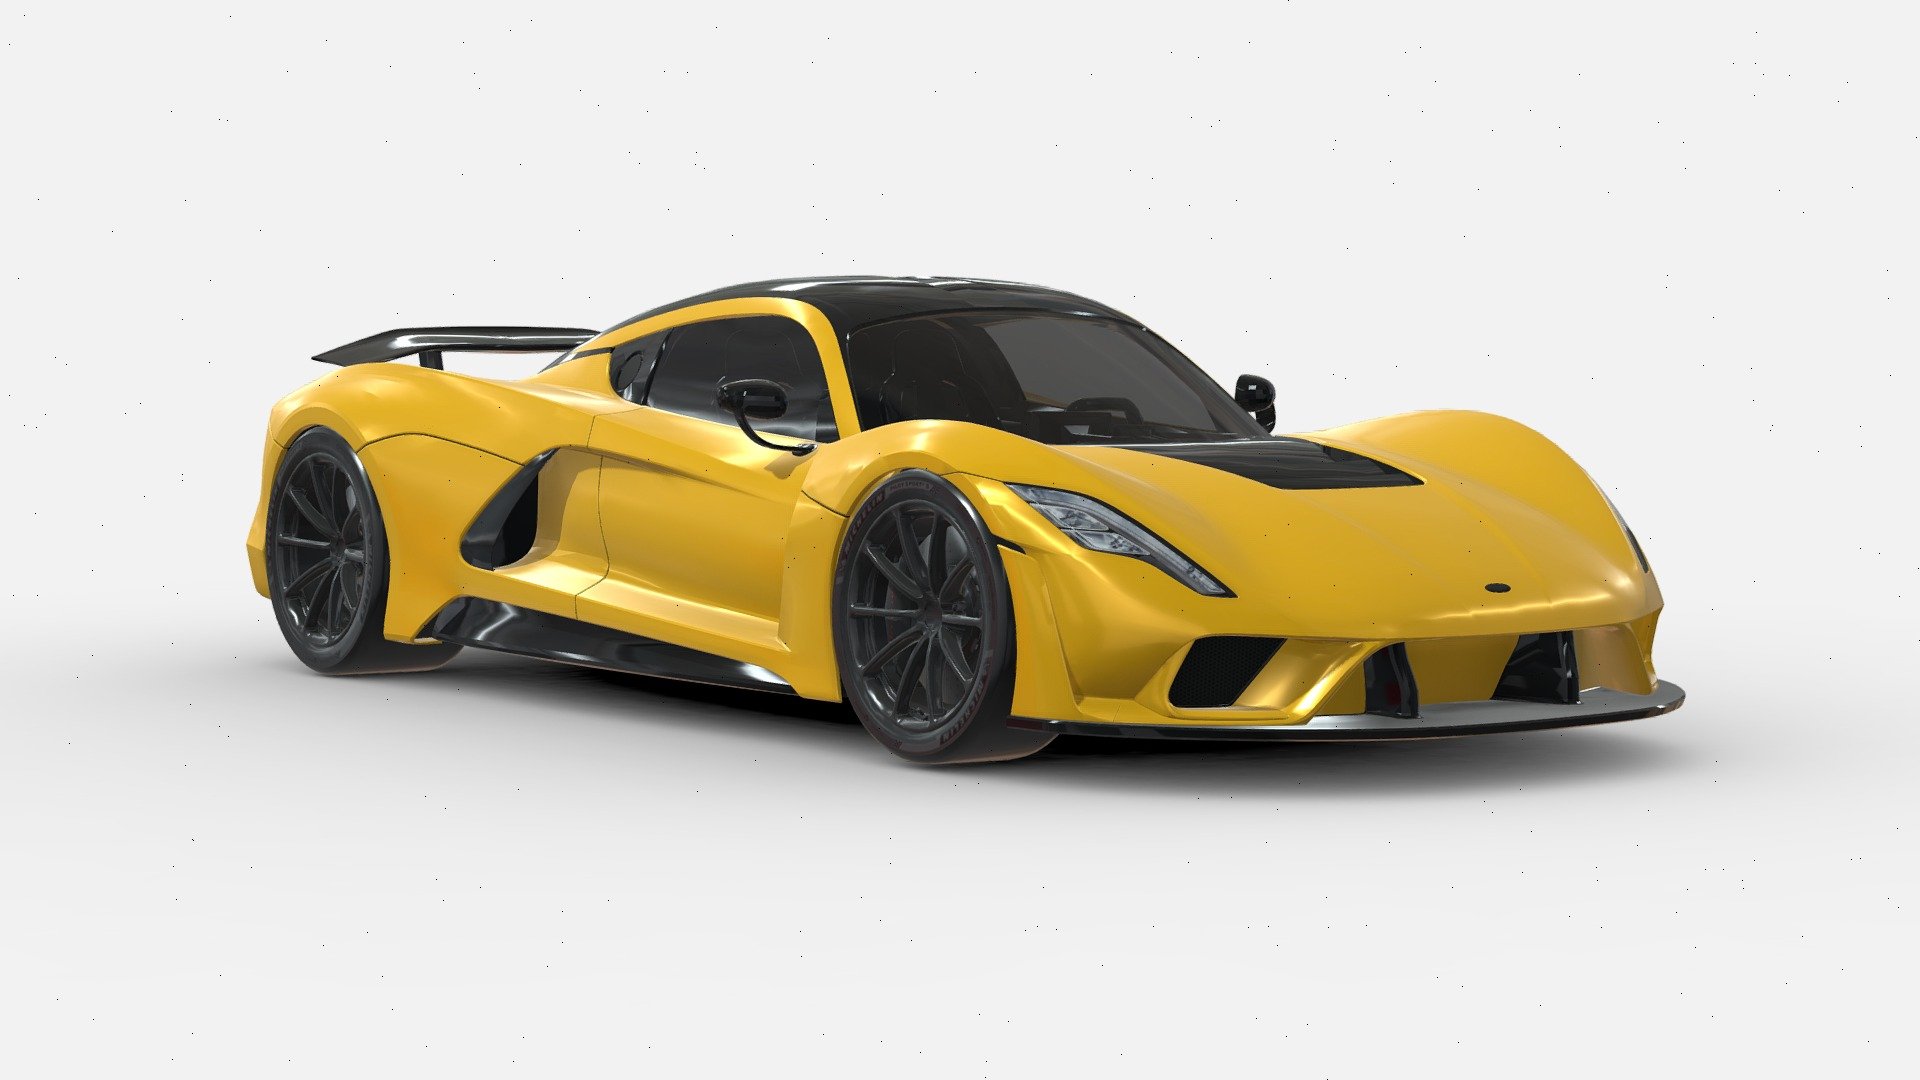 Could you please consider liking and subscribing to my account. Your support would mean a lot to me. Thank you! - 3d model Hennessey Venom - Buy Royalty Free 3D model by zizian 3d model